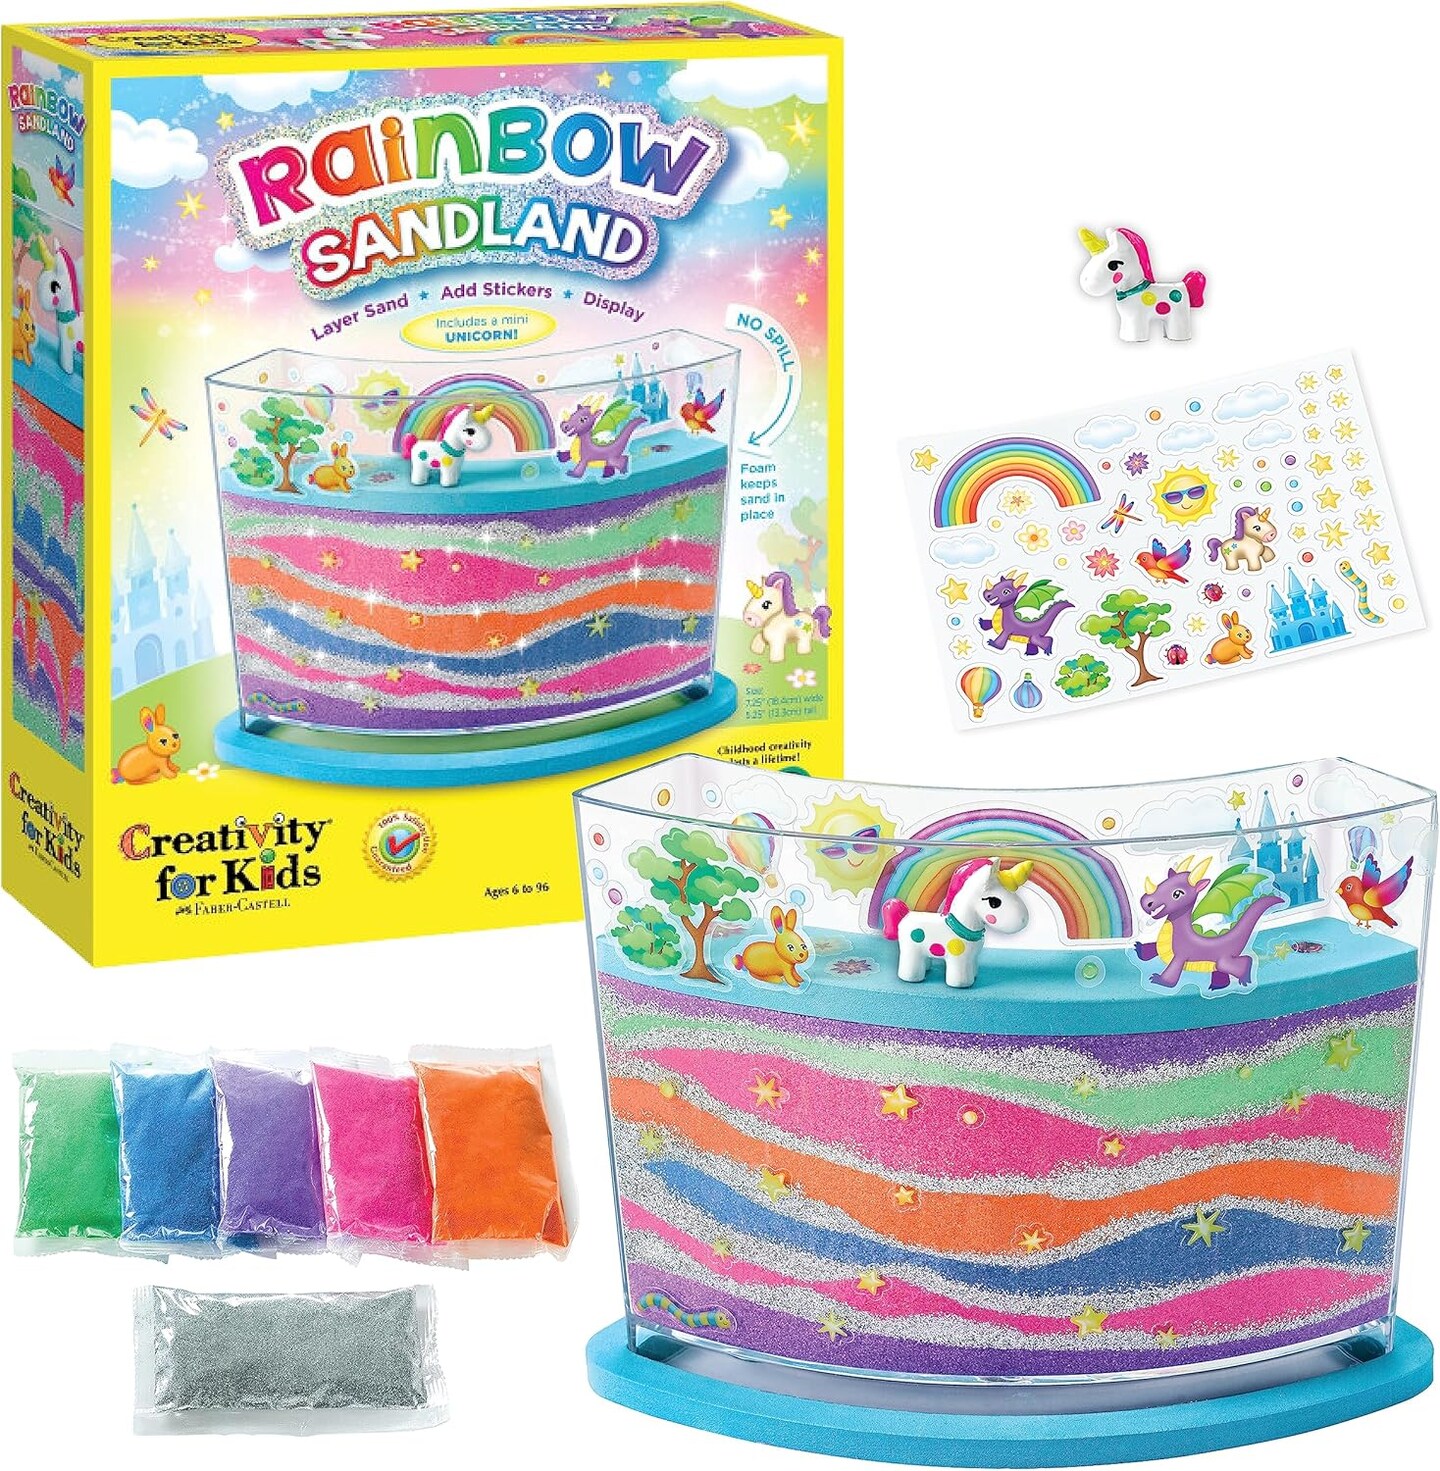 Rainbow Sandland - Create Your Own Sensory Sand Art for Kids - Arts and Crafts for Kids Ages 6 and Up